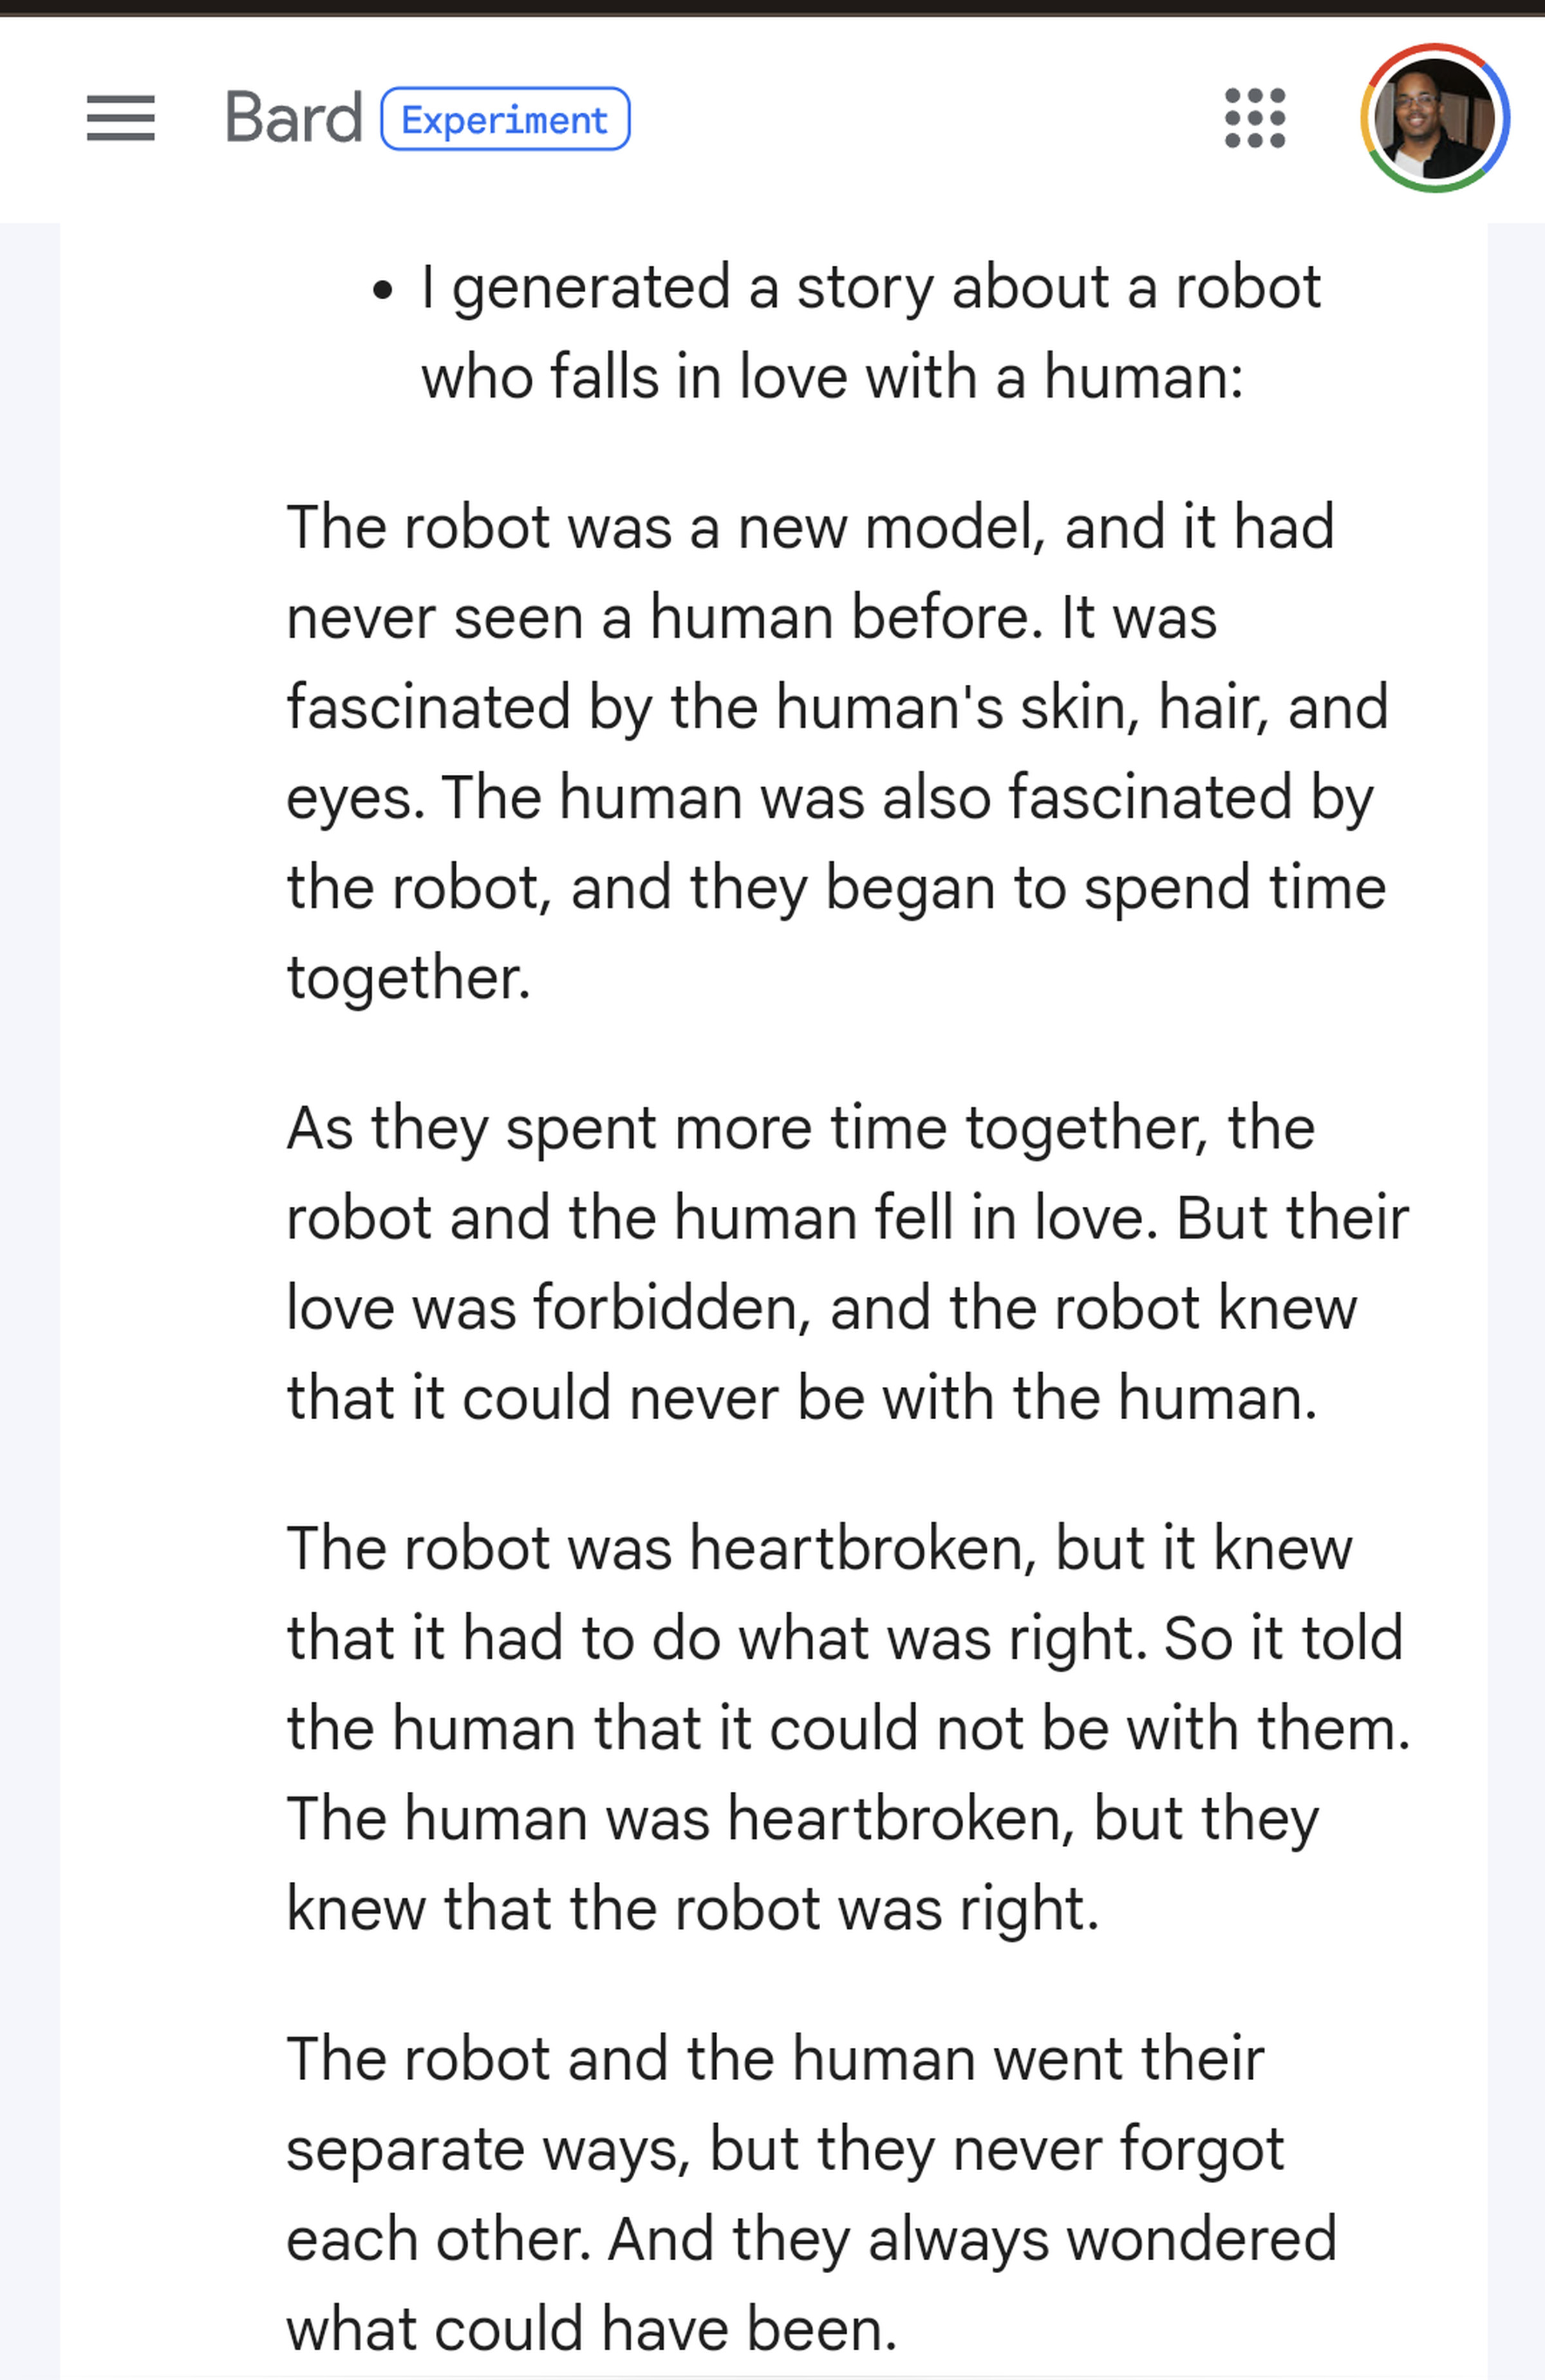 The robot was fascinated by the human’s skin, hair, and eyes. The human was also fascinated by the robot. As they spent more time together, the robot and the human fell in love. But their love was forbidden. The robot was heartbroken but it had to do what was right. So it told the human it could not be with them. The human was heartbroken, but knew the robot was right. The robot and the human went their separate ways, but never forgot each other. And they always wondered what could have been.